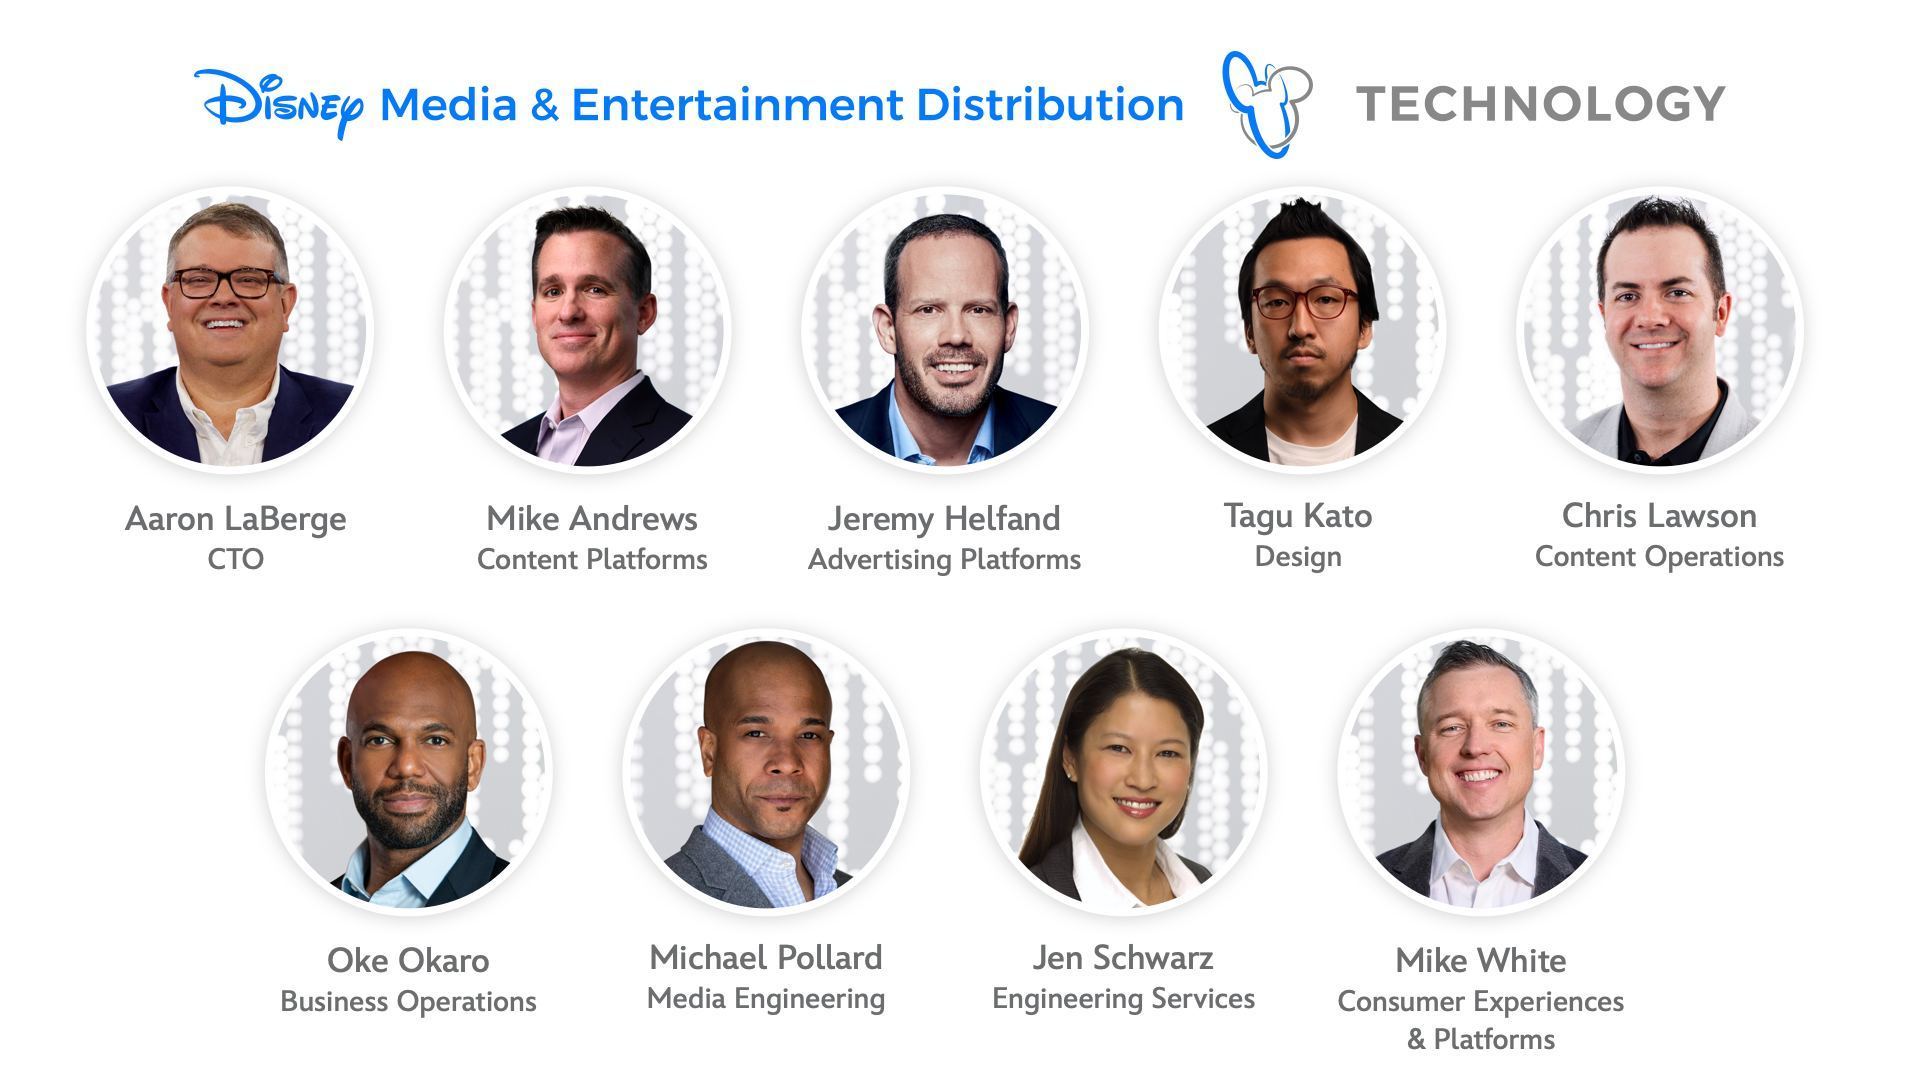 Disney Media & Entertainment Distribution Technology Adds To Leadership Team and Realigns For The Future